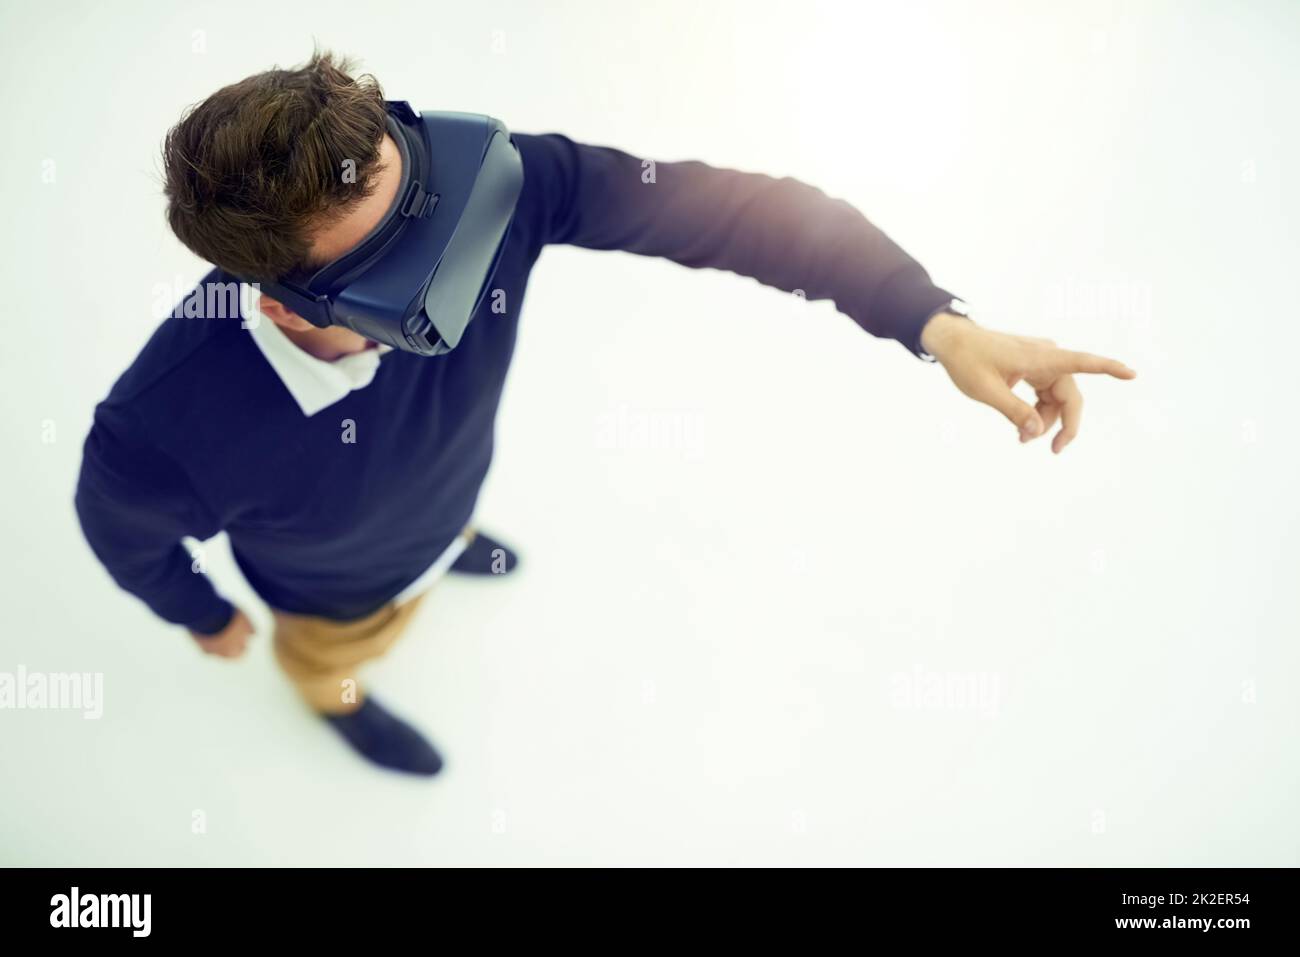 Logged in to the virtual world. High angle shot of a businessman wearing a VR headset while connecting to a user interface in an office. Stock Photo